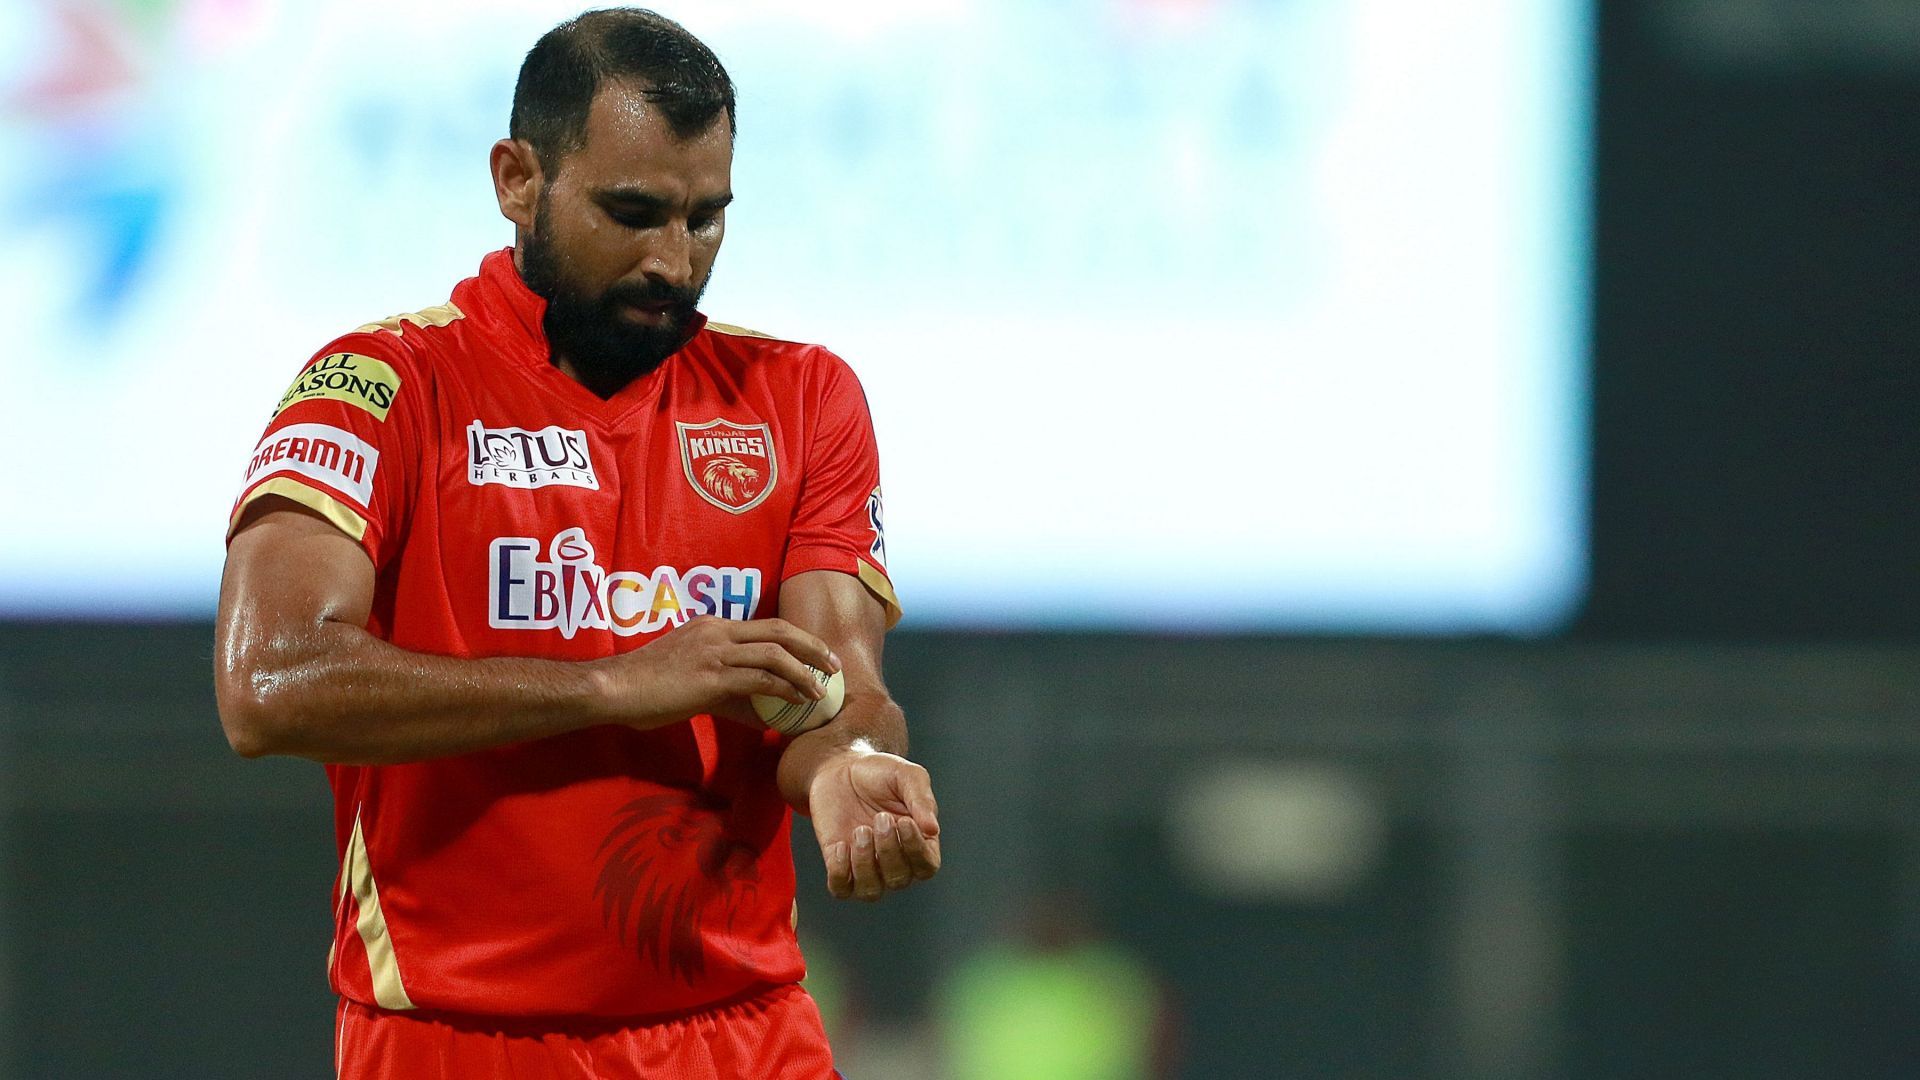 Mohammed Shami will have a few takers in the IPL 2022 Auction